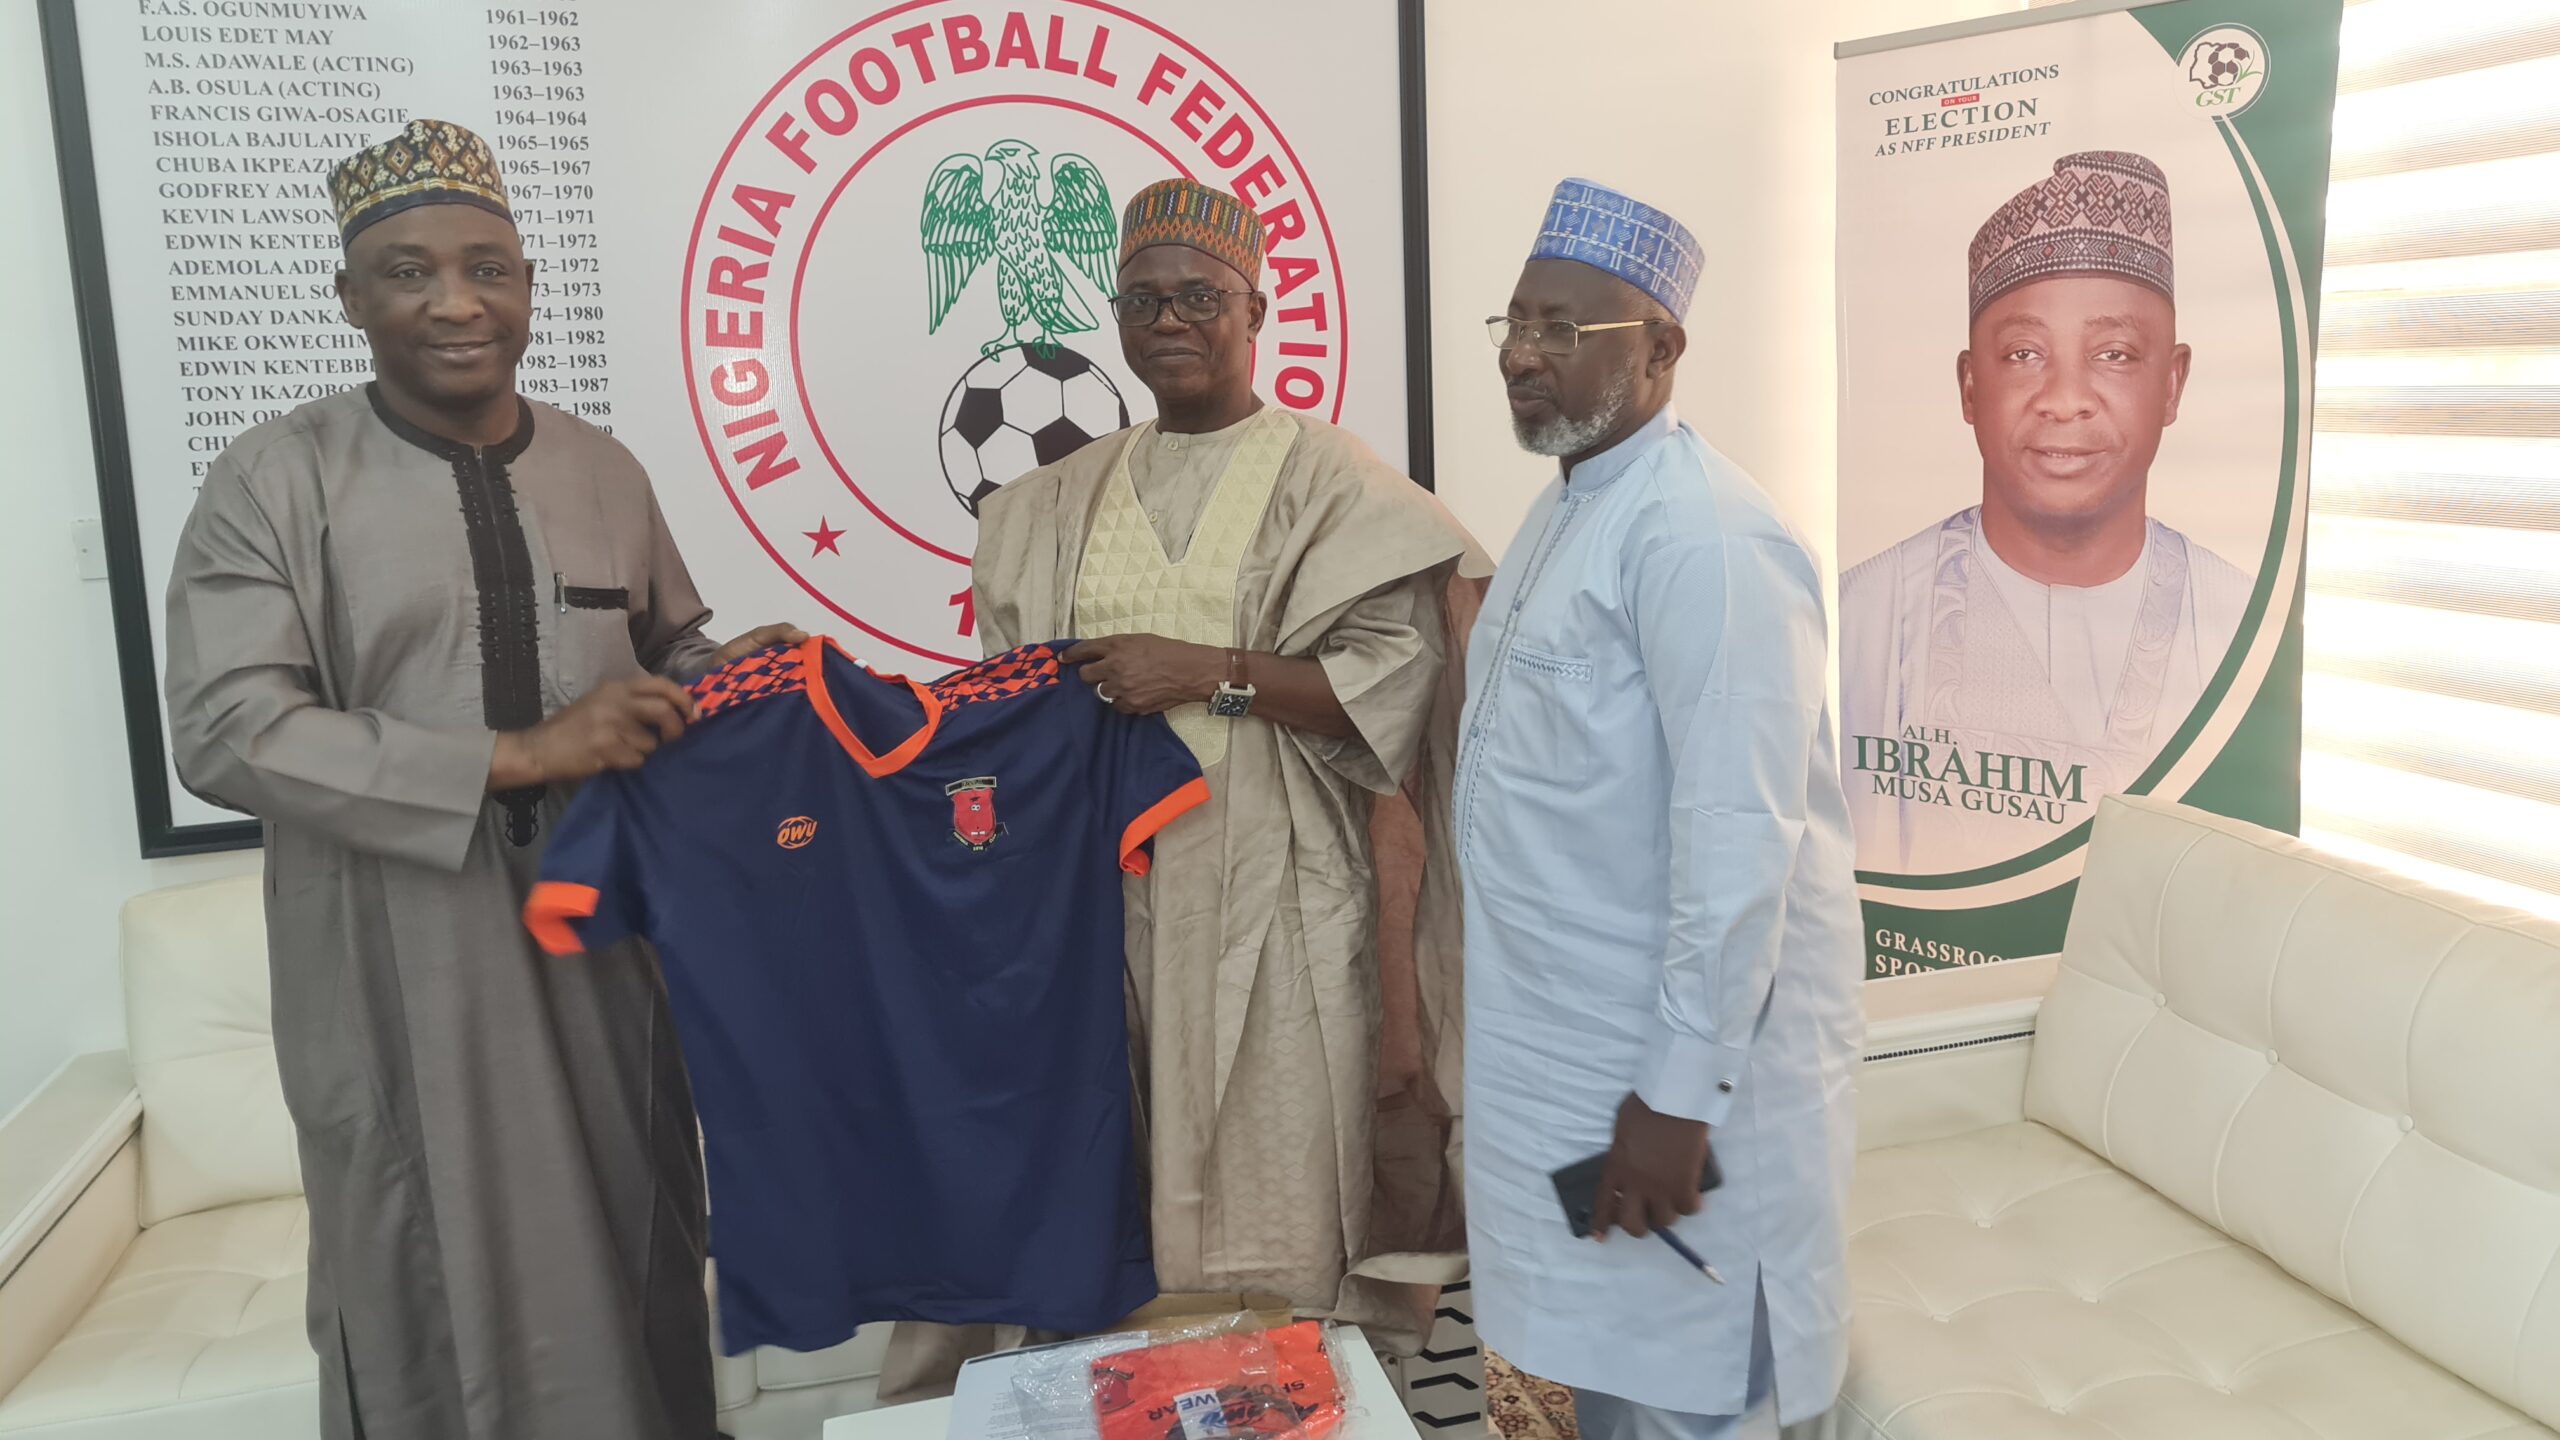 UPDATE! Former NFF President Sani Lulu Lauds Gusau Over Sincerity, Vision And Direction